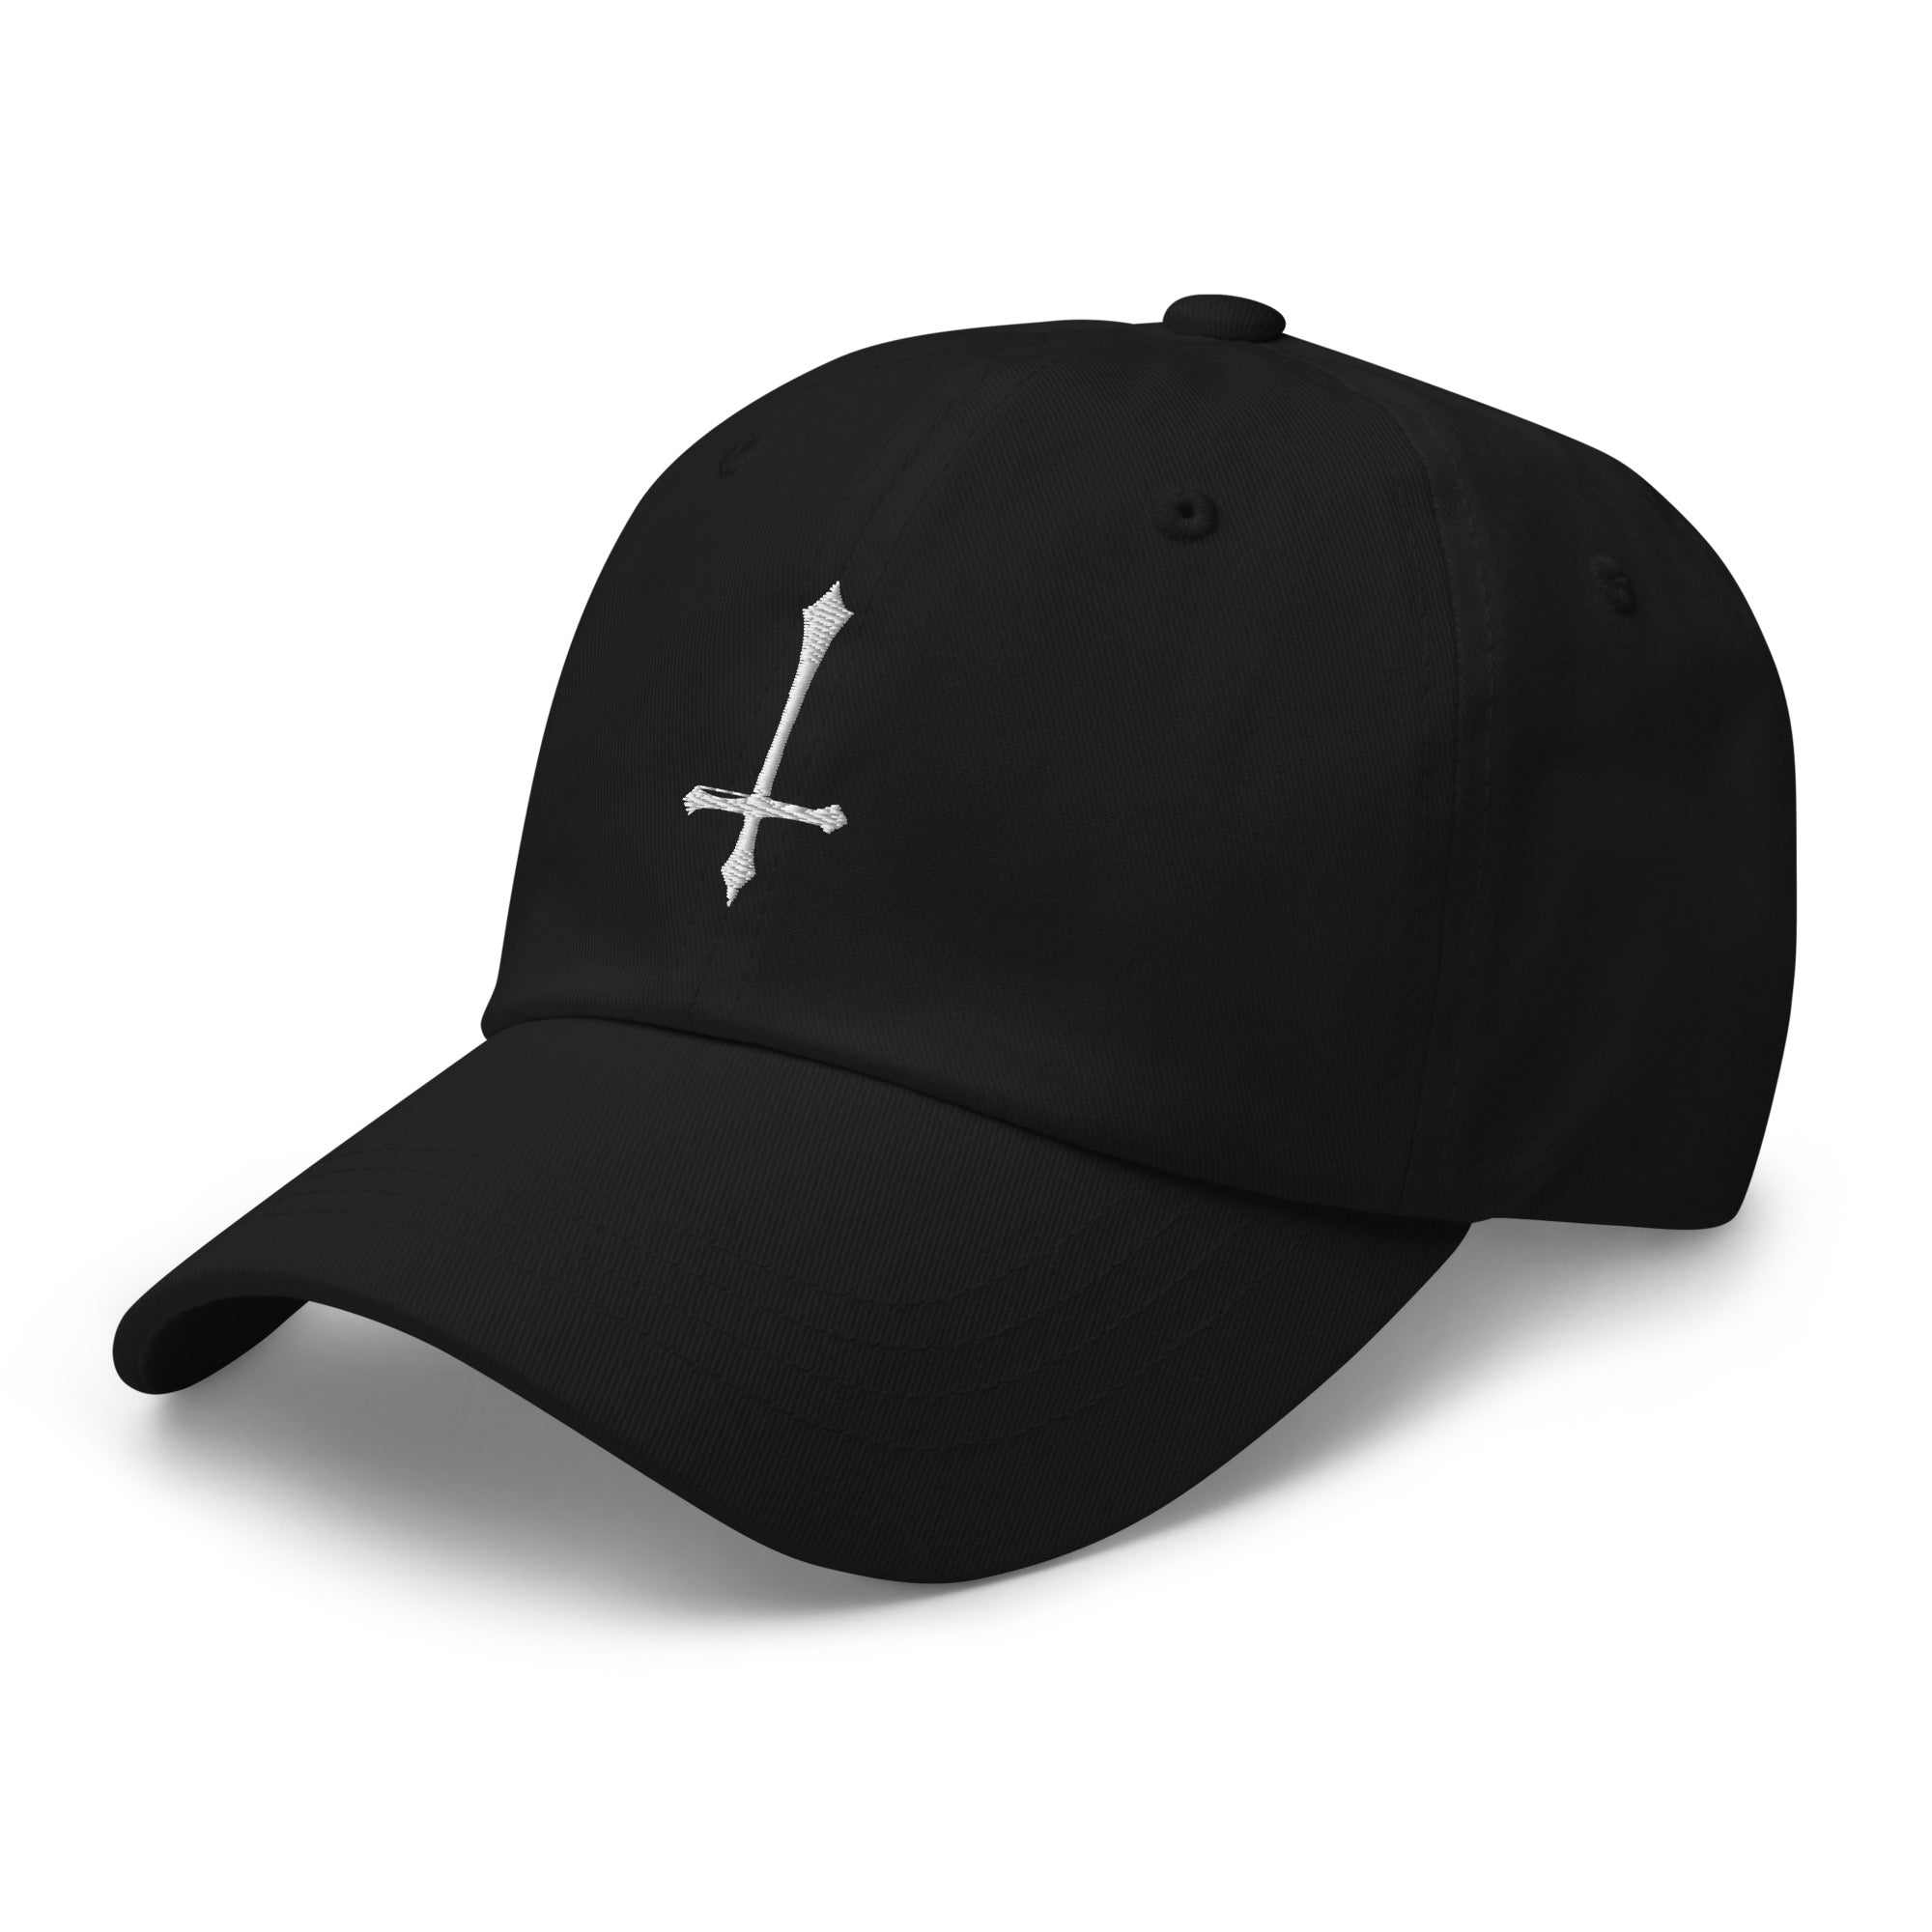 White Inverted Cross Embroidered Baseball Cap Gothic Ancient Medeival Style Dad hat - Edge of Life Designs